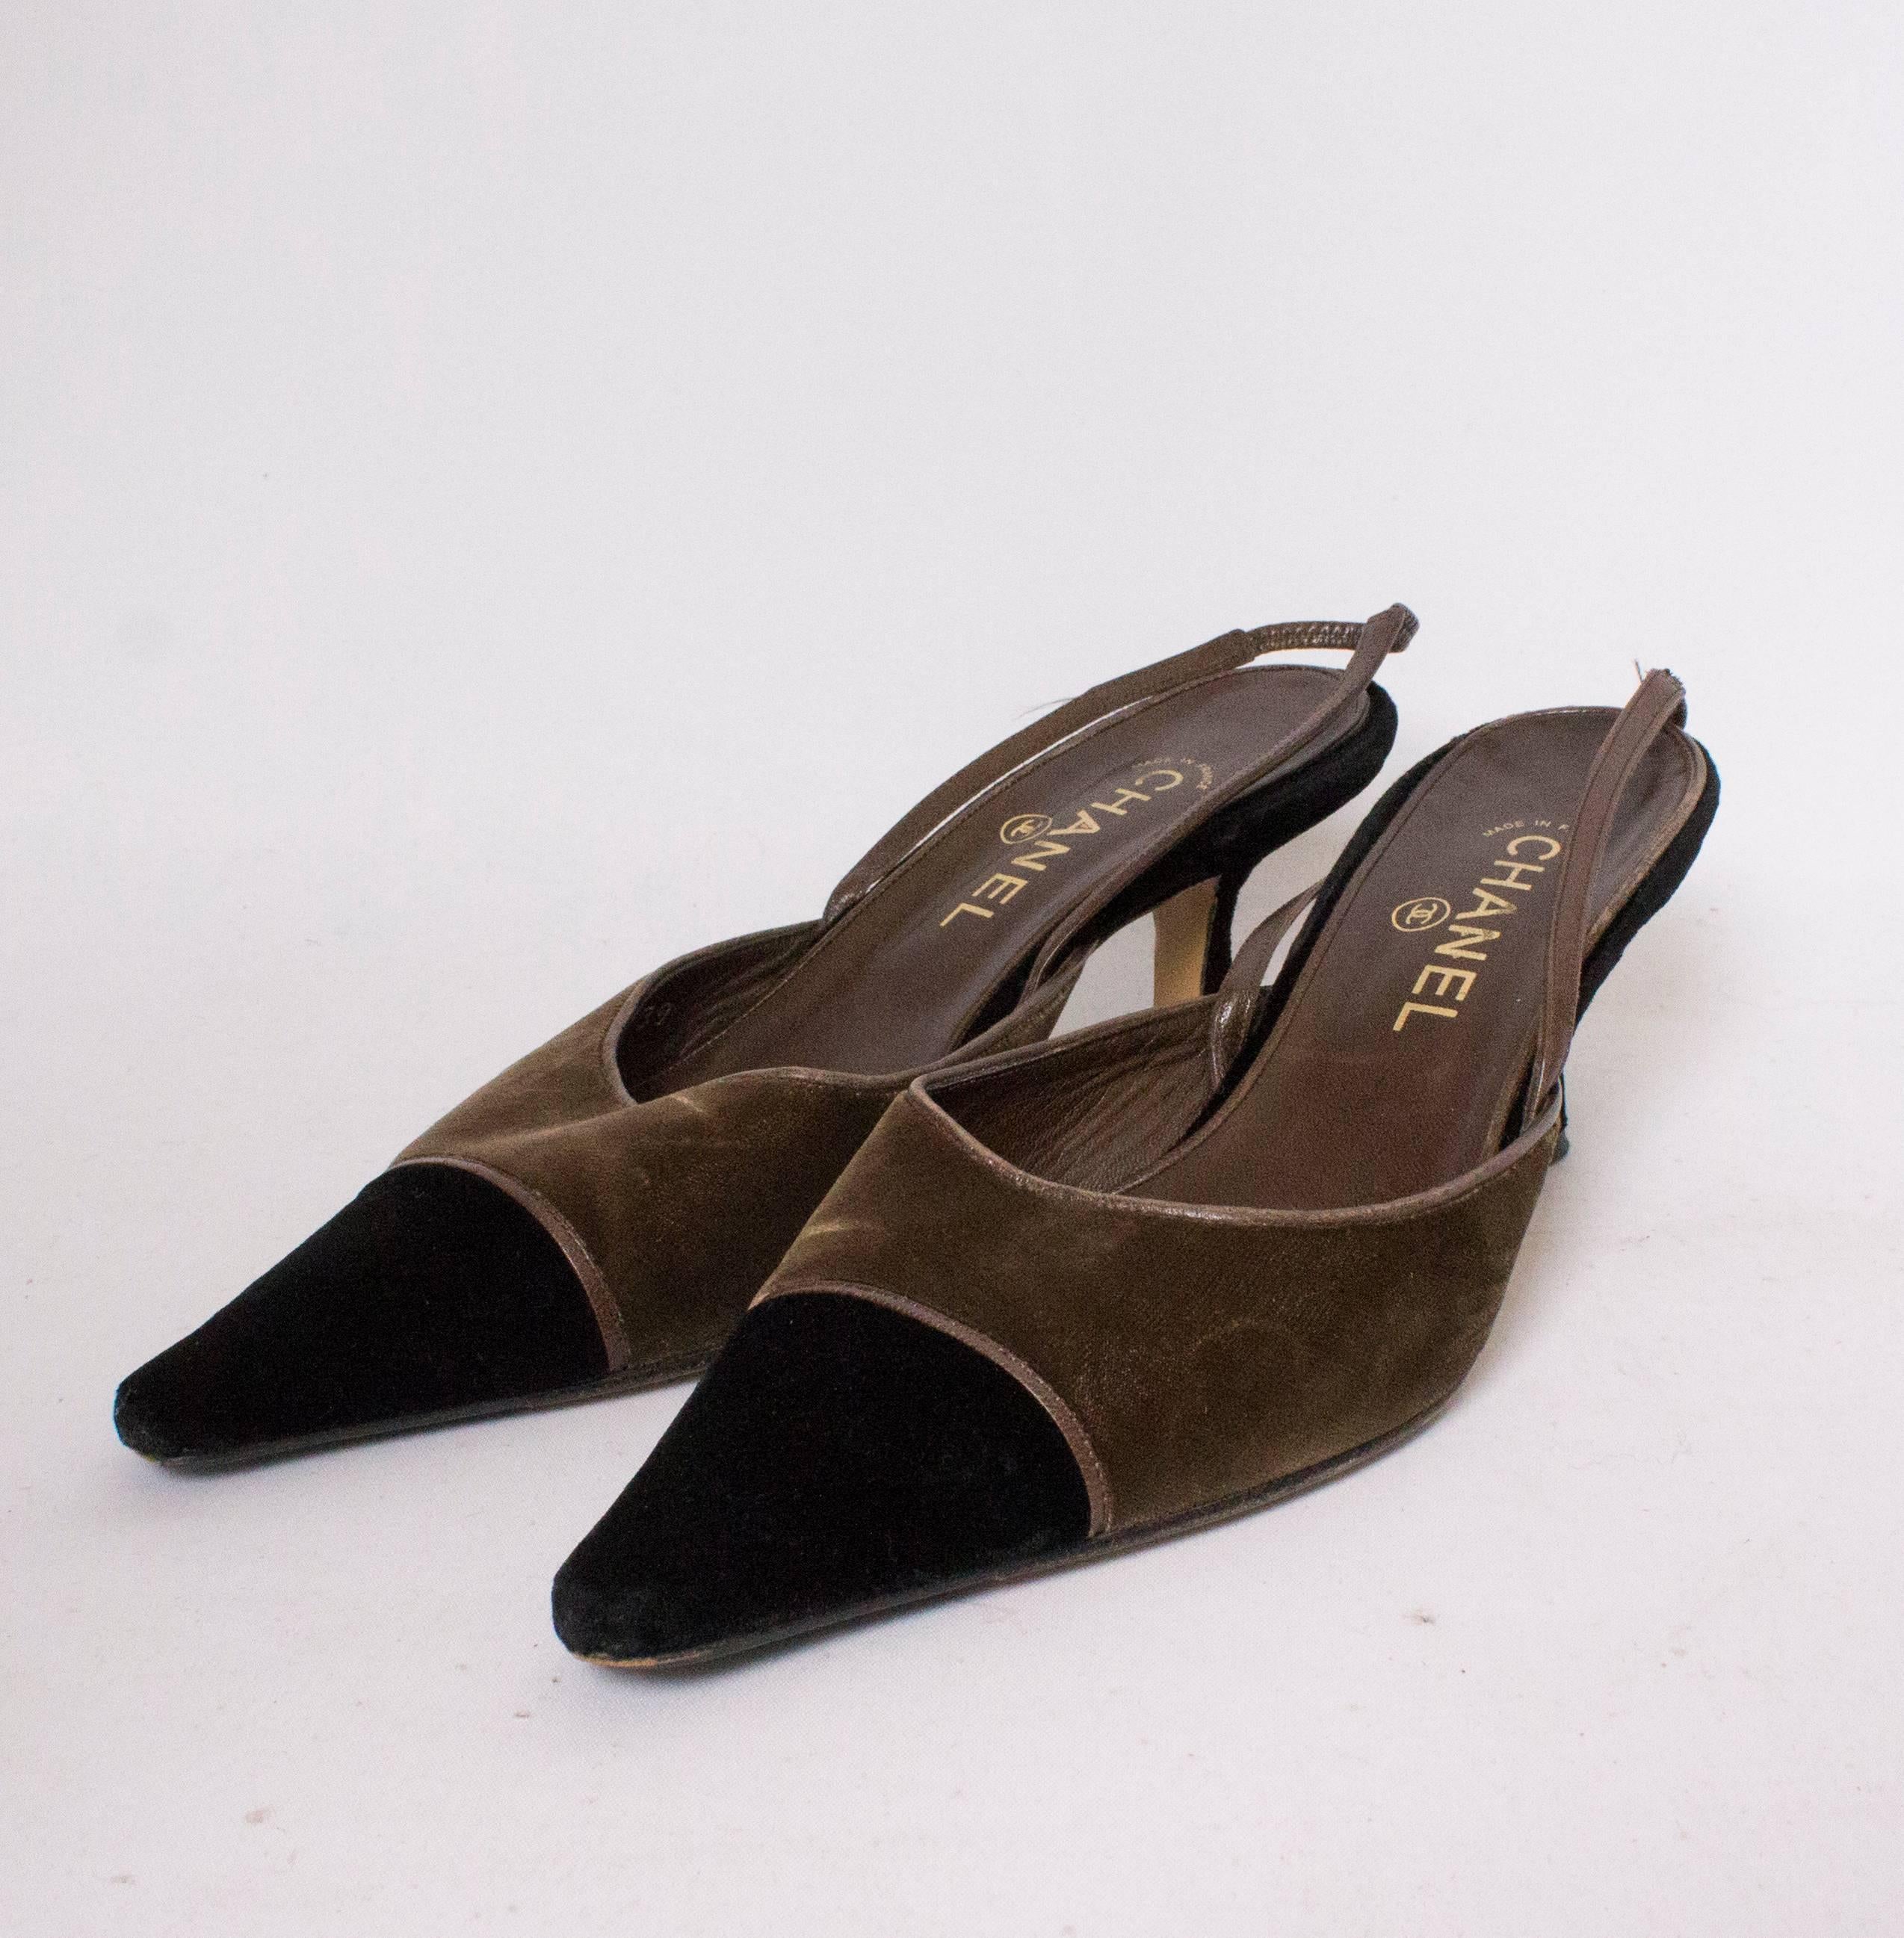 A chic pair of shoes by Chanel . In contrasting colours, of coffe and black velvet. The shoes are sling back with a kittehn heel.
Size Chanel size 39./UK 6 /6 1/2